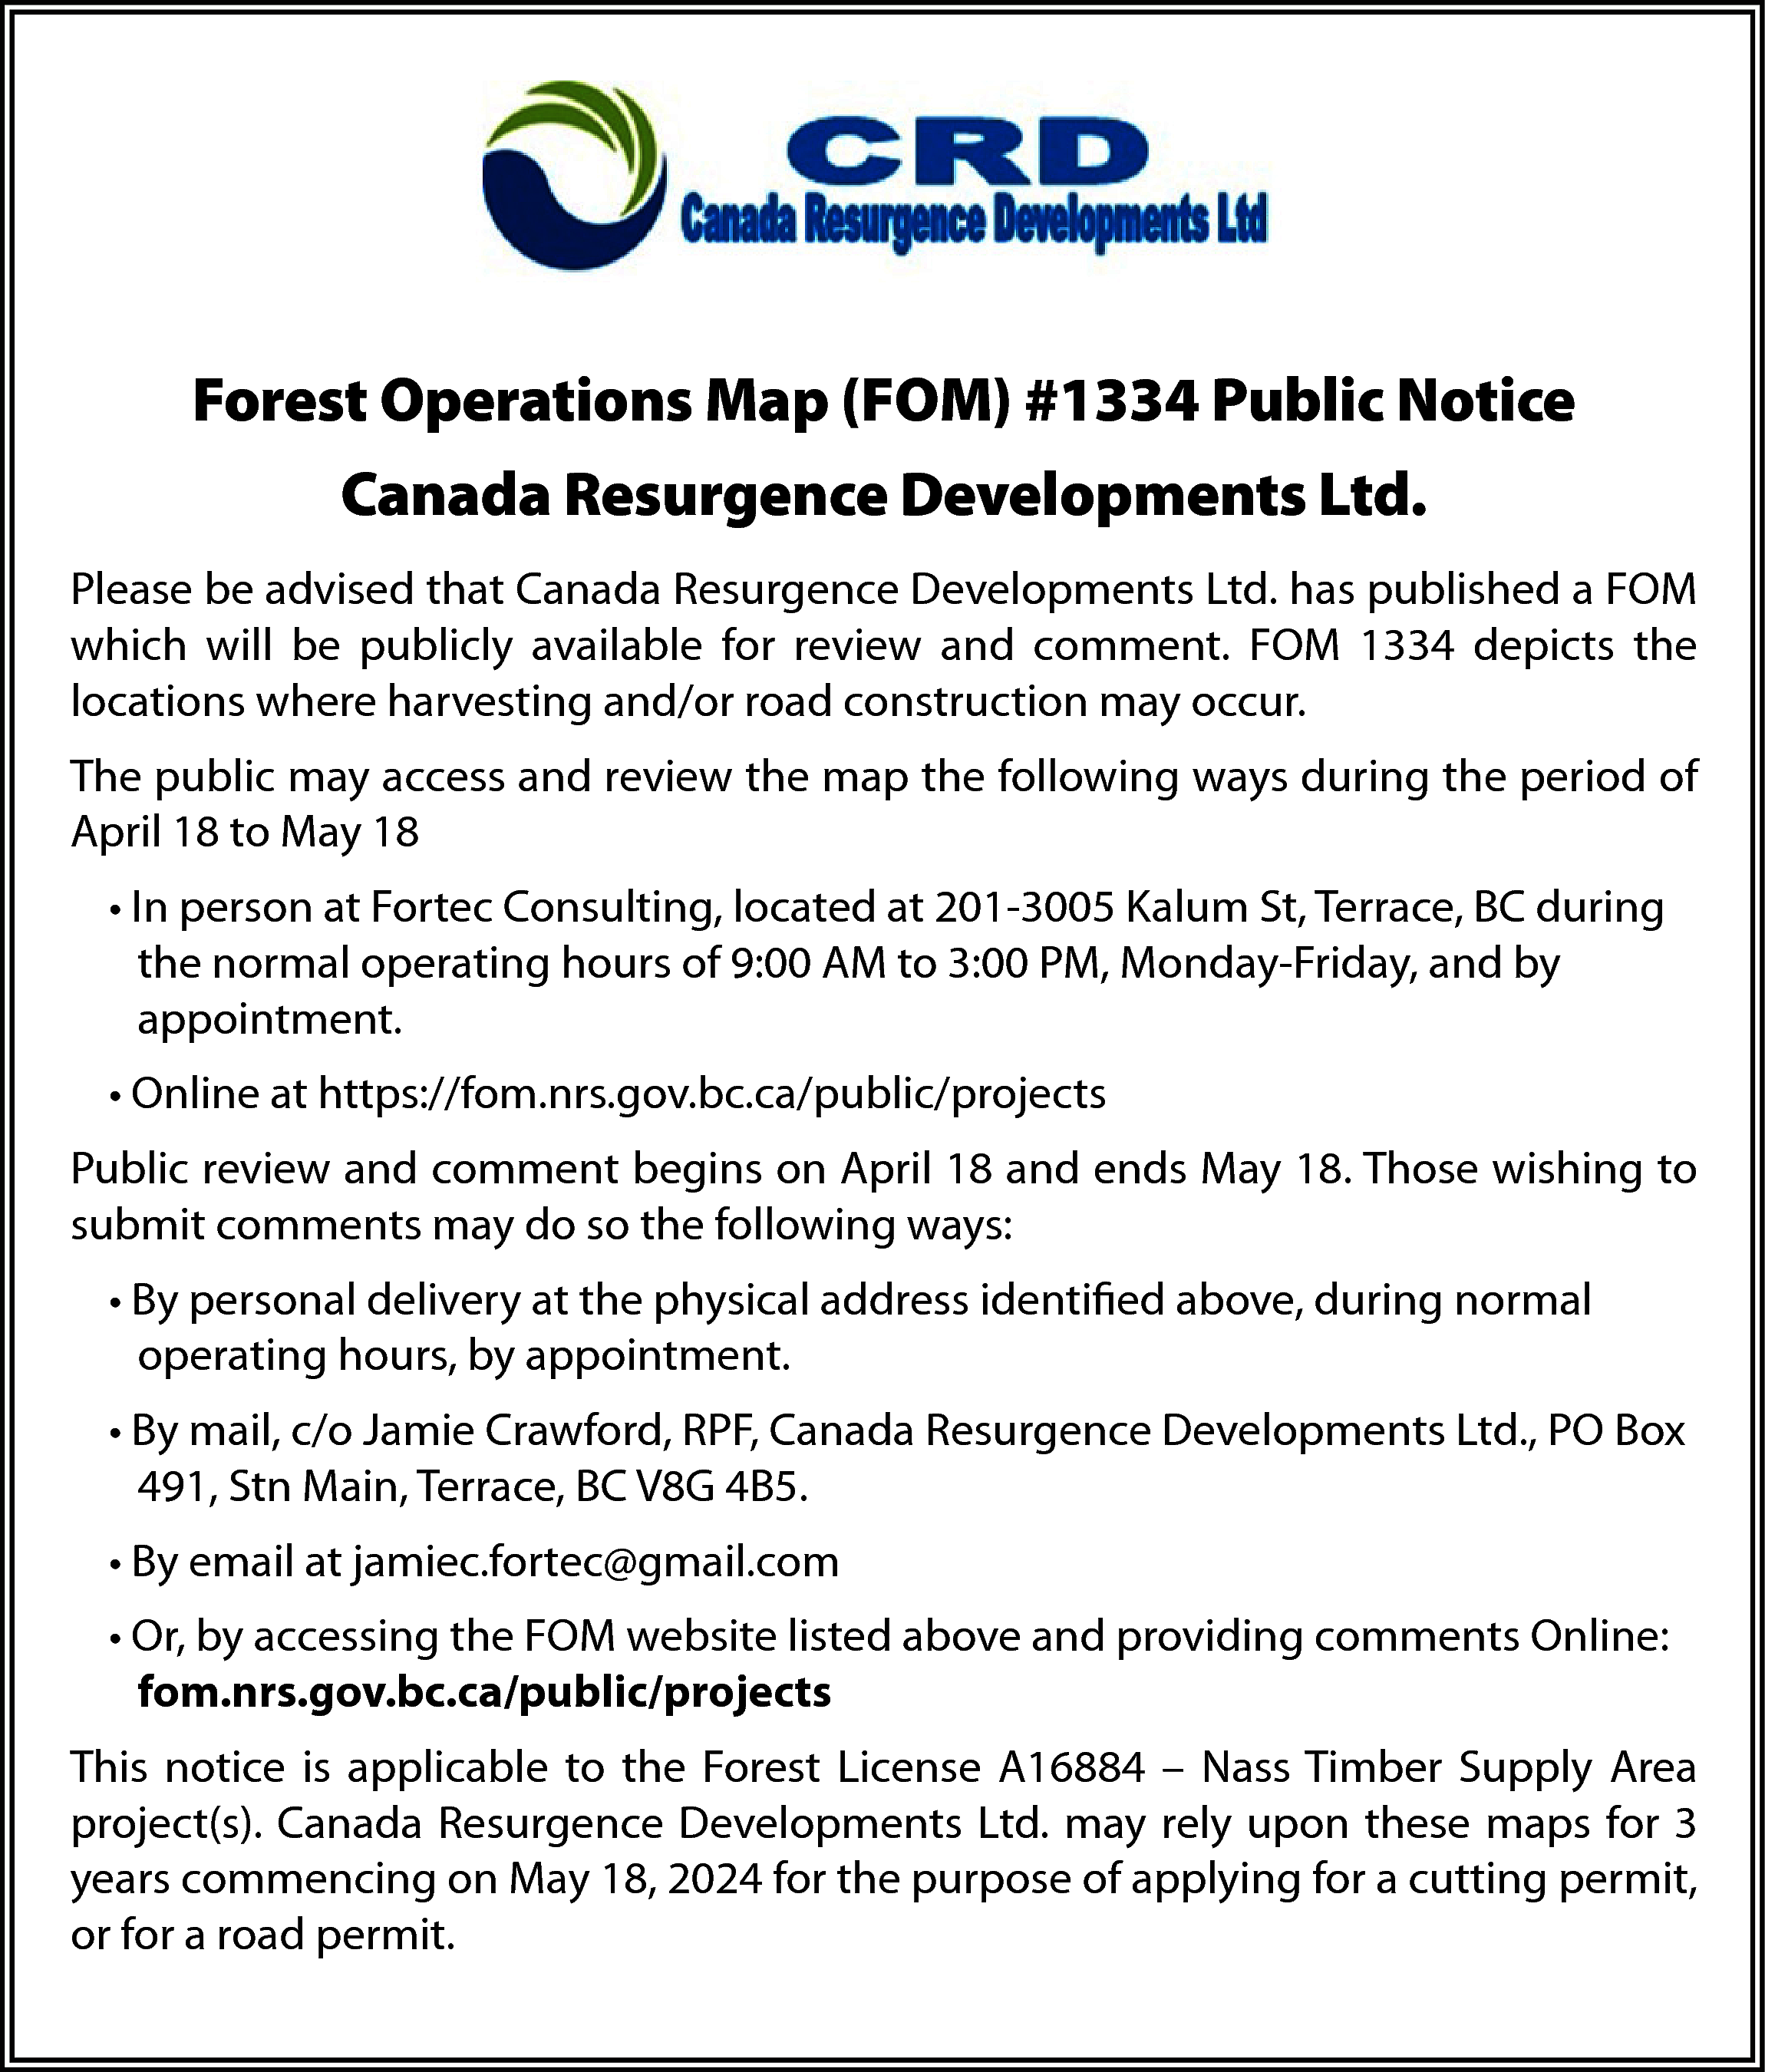 Forest Operations Map (FOM) #1334  Forest Operations Map (FOM) #1334 Public Notice  Canada Resurgence Developments Ltd.  Please be advised that Canada Resurgence Developments Ltd. has published a FOM  which will be publicly available for review and comment. FOM 1334 depicts the  locations where harvesting and/or road construction may occur.  The public may access and review the map the following ways during the period of  April 18 to May 18  • In person at Fortec Consulting, located at 201-3005 Kalum St, Terrace, BC during  the normal operating hours of 9:00 AM to 3:00 PM, Monday-Friday, and by  appointment.  • Online at https://fom.nrs.gov.bc.ca/public/projects  Public review and comment begins on April 18 and ends May 18. Those wishing to  submit comments may do so the following ways:  • By personal delivery at the physical address identified above, during normal  operating hours, by appointment.  • By mail, c/o Jamie Crawford, RPF, Canada Resurgence Developments Ltd., PO Box  491, Stn Main, Terrace, BC V8G 4B5.  • By email at jamiec.fortec@gmail.com  • Or, by accessing the FOM website listed above and providing comments Online:  fom.nrs.gov.bc.ca/public/projects  This notice is applicable to the Forest License A16884 – Nass Timber Supply Area  project(s). Canada Resurgence Developments Ltd. may rely upon these maps for 3  years commencing on May 18, 2024 for the purpose of applying for a cutting permit,  or for a road permit.    